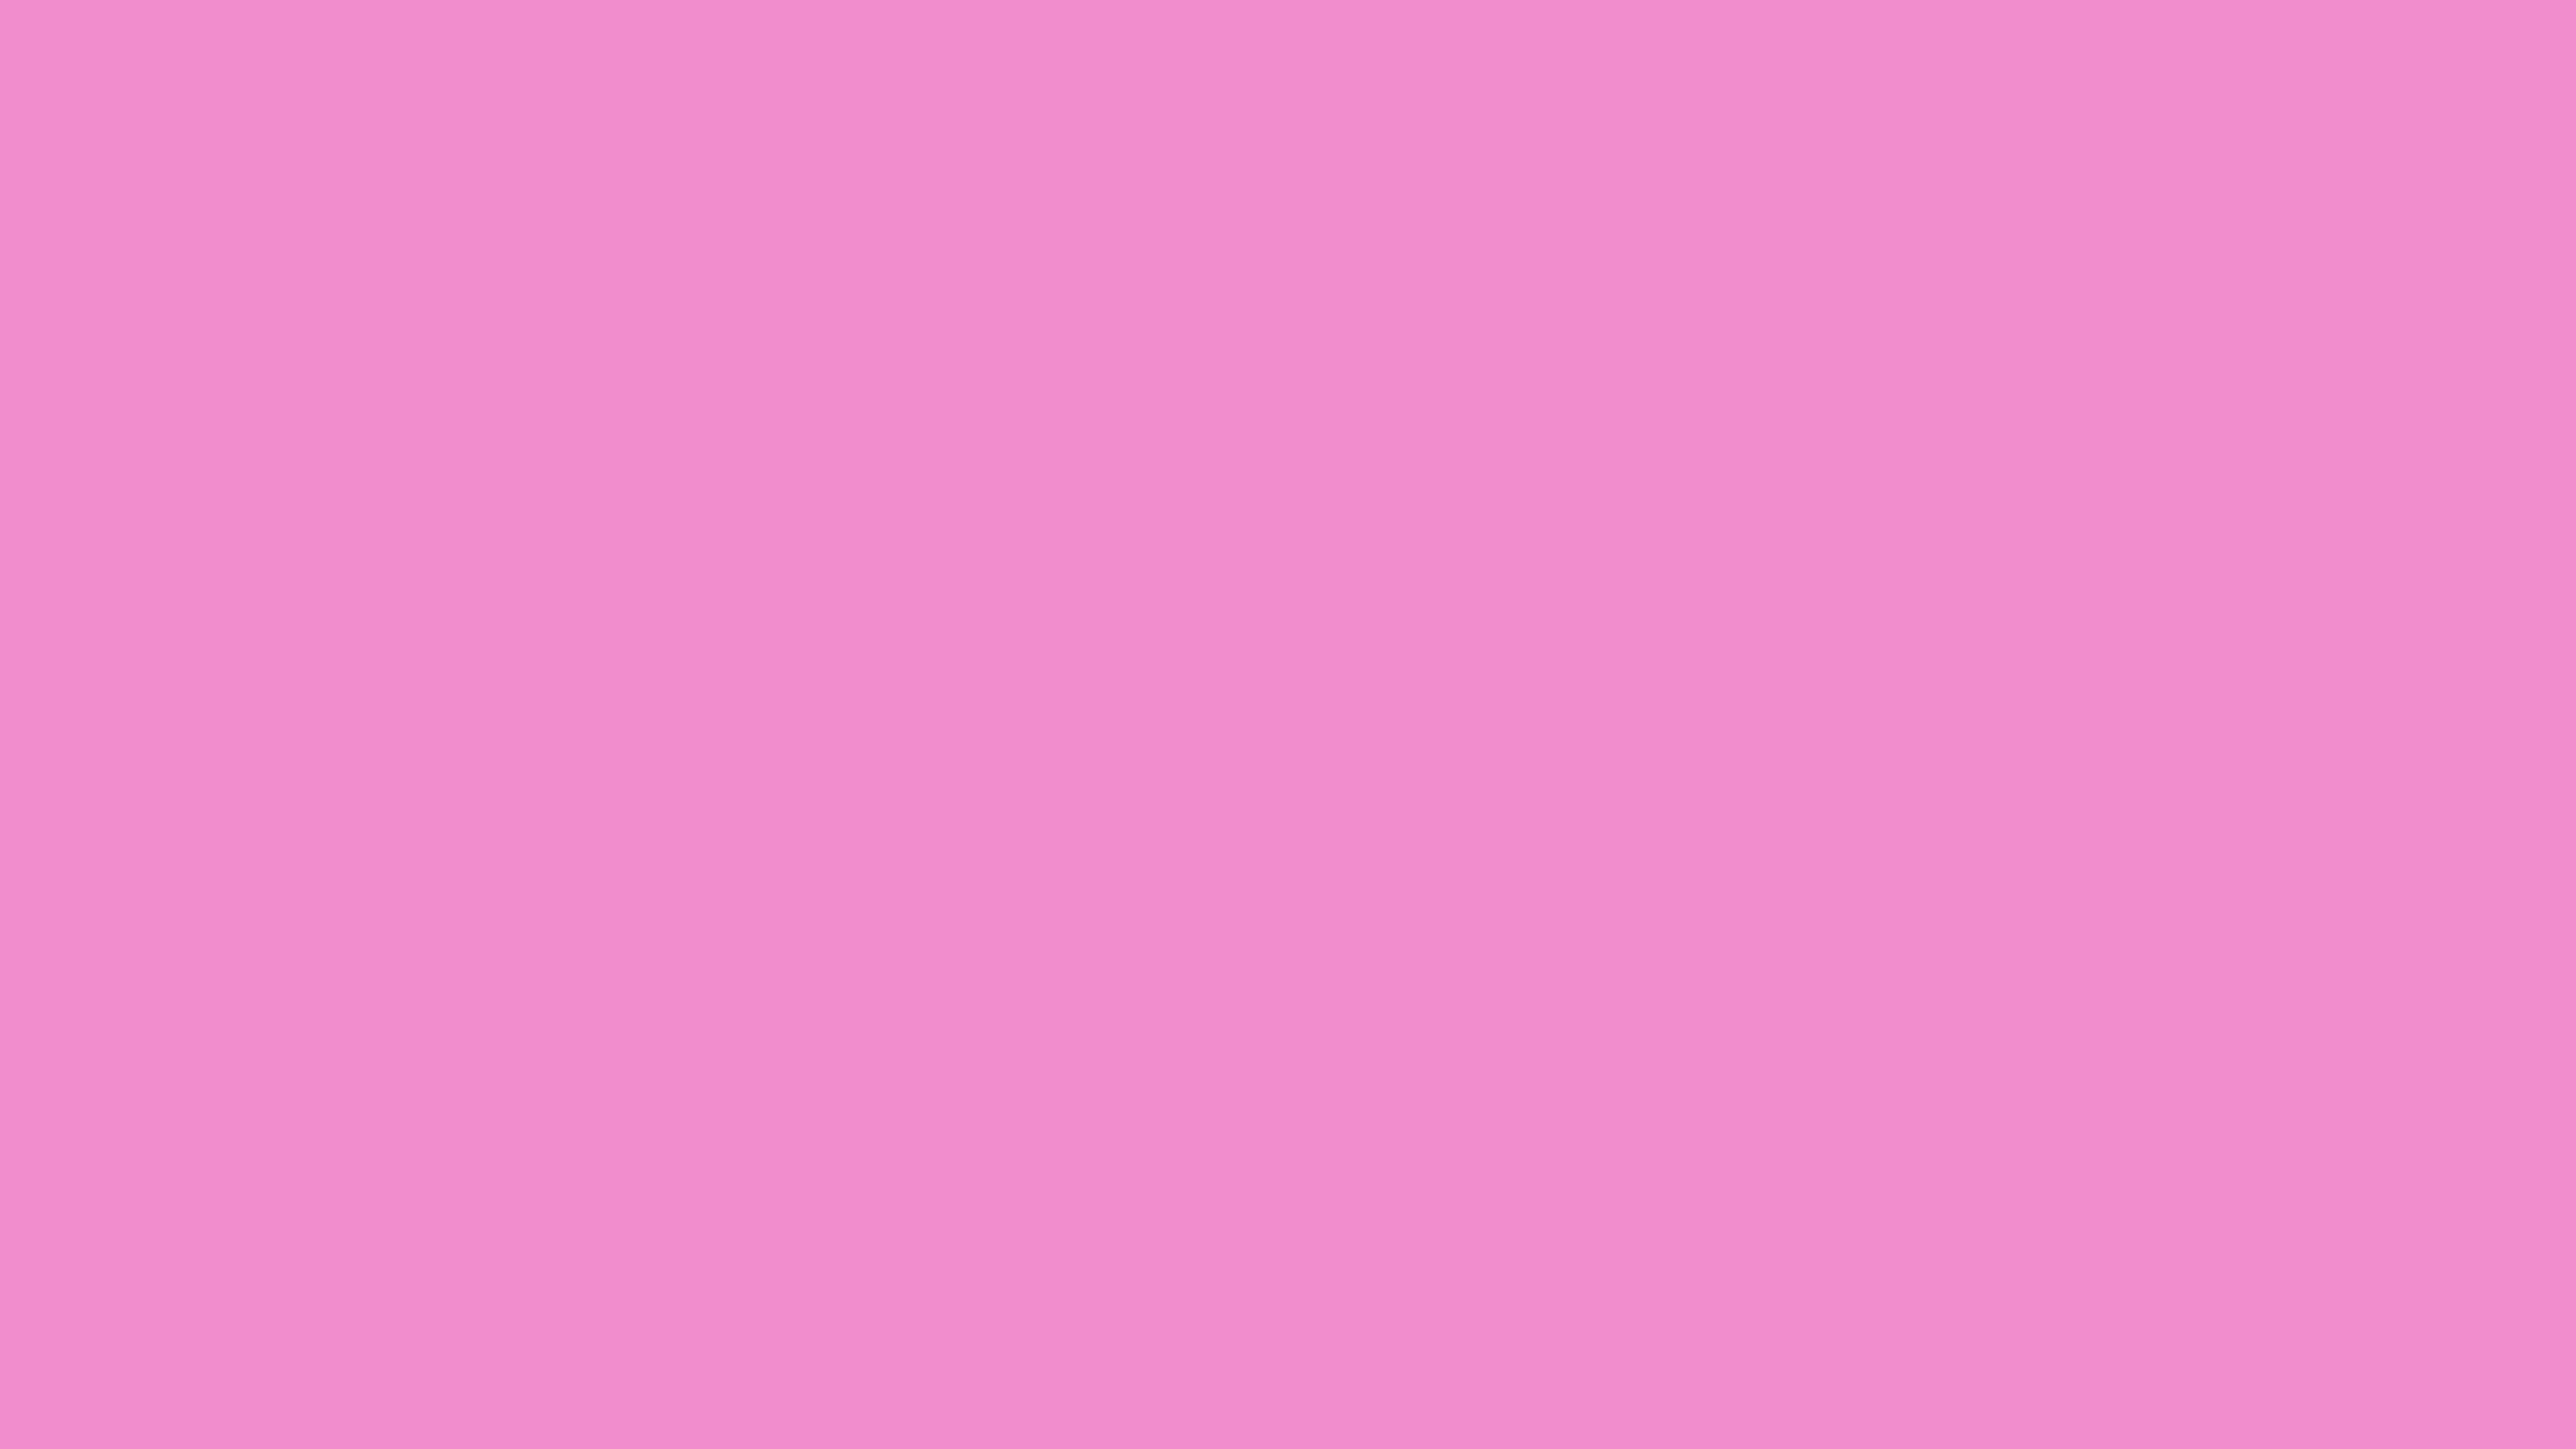 7680x4320 Orchid Pink Solid Color Background